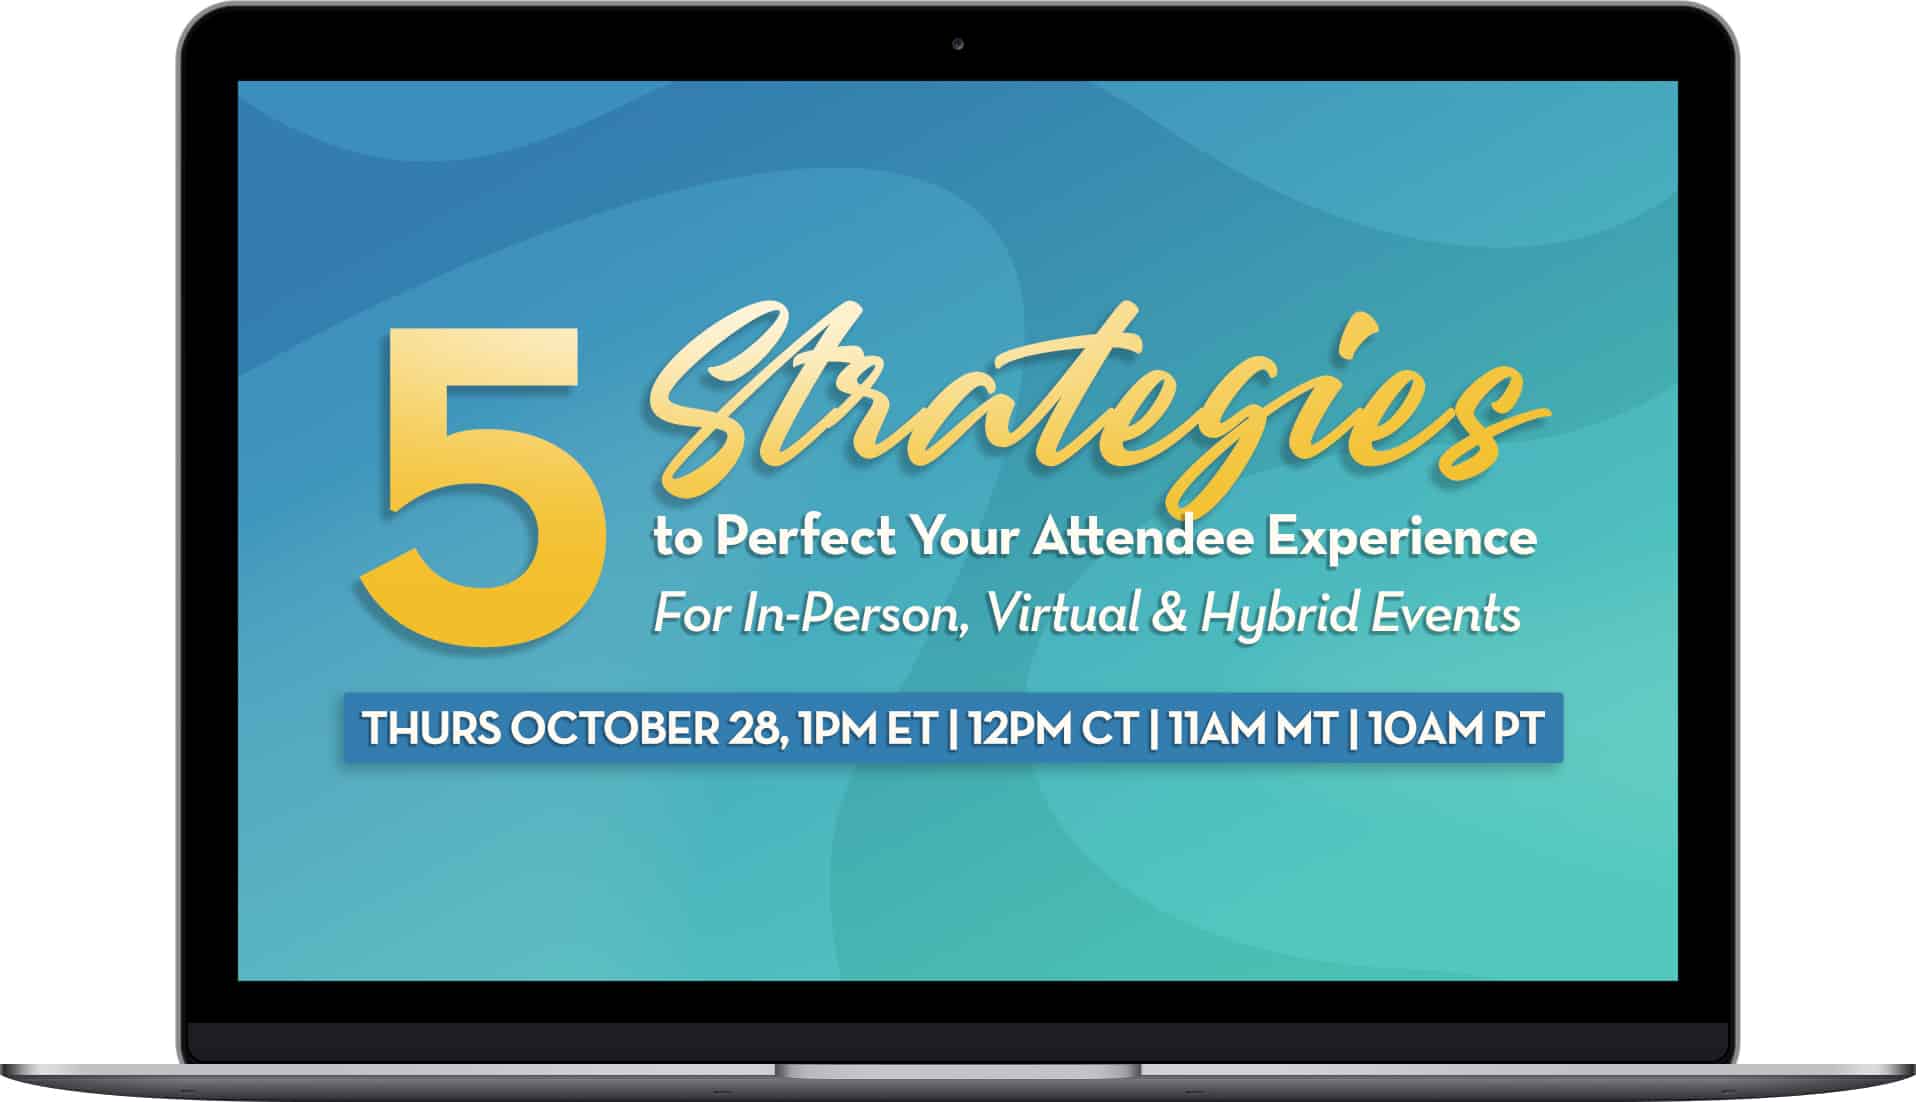 5 Strategies to Perfect Your Attendee Experience | For In-Person, Virtual & Hybrid Events